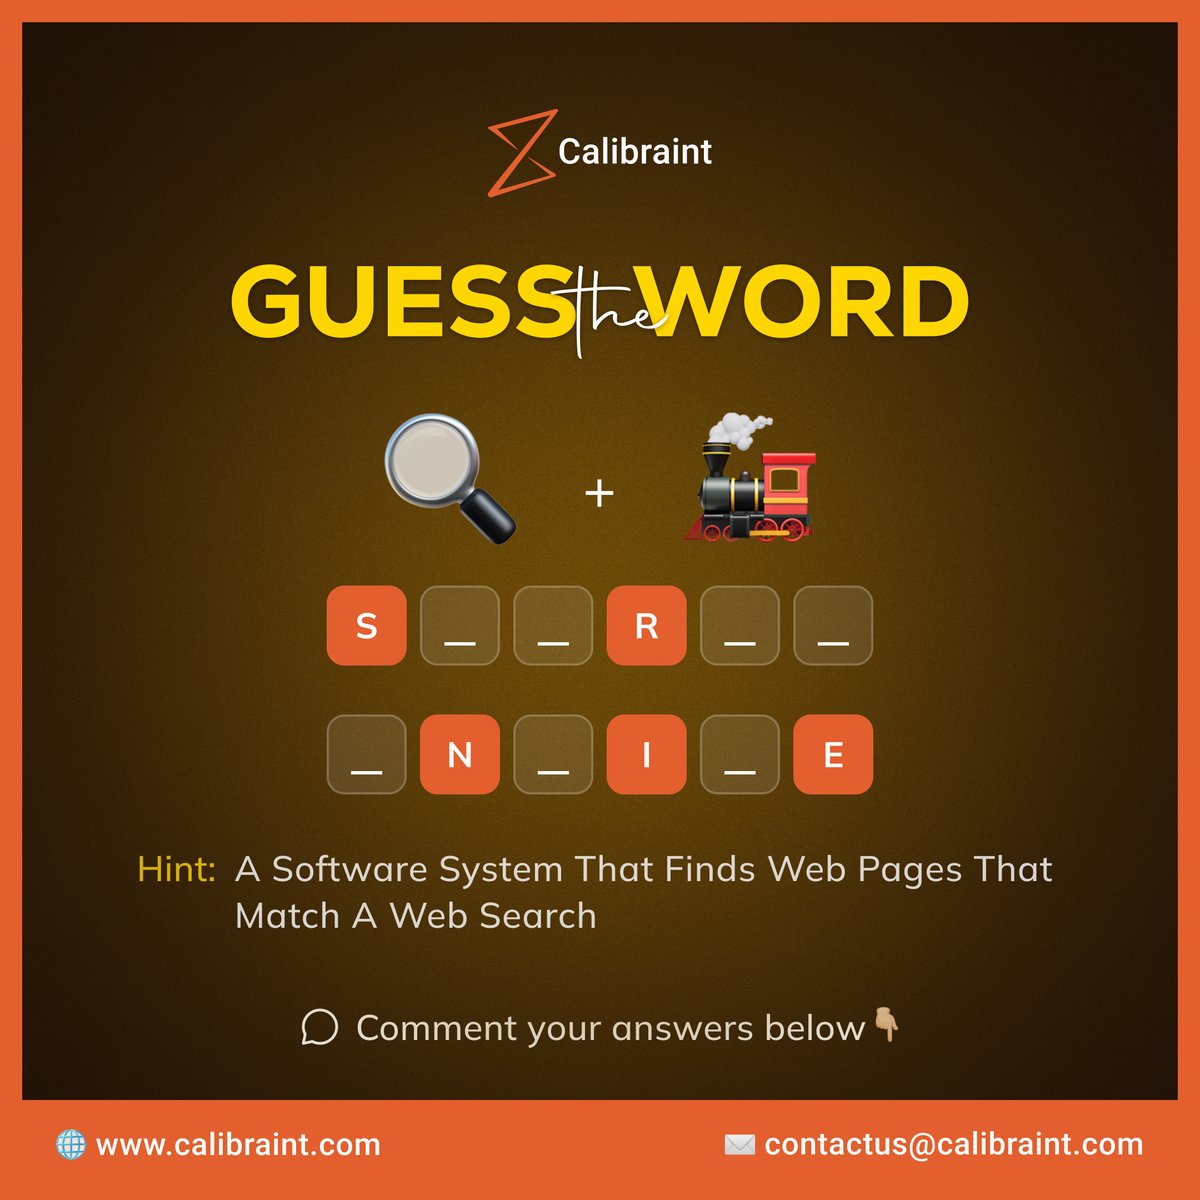 Can You Decipher The Riddle And Unlock The Answer? 👨‍💻 #Calibraint      

Website: lnkd.in/f_zs7rM 

#puzzles #puzzle #riddles #riddle #quizzes #quiz #guesstheword #softwaredevelopment #quiztime #solveproblems #techquiz #comment #iotsolutions #softwaredevelopmentcompany